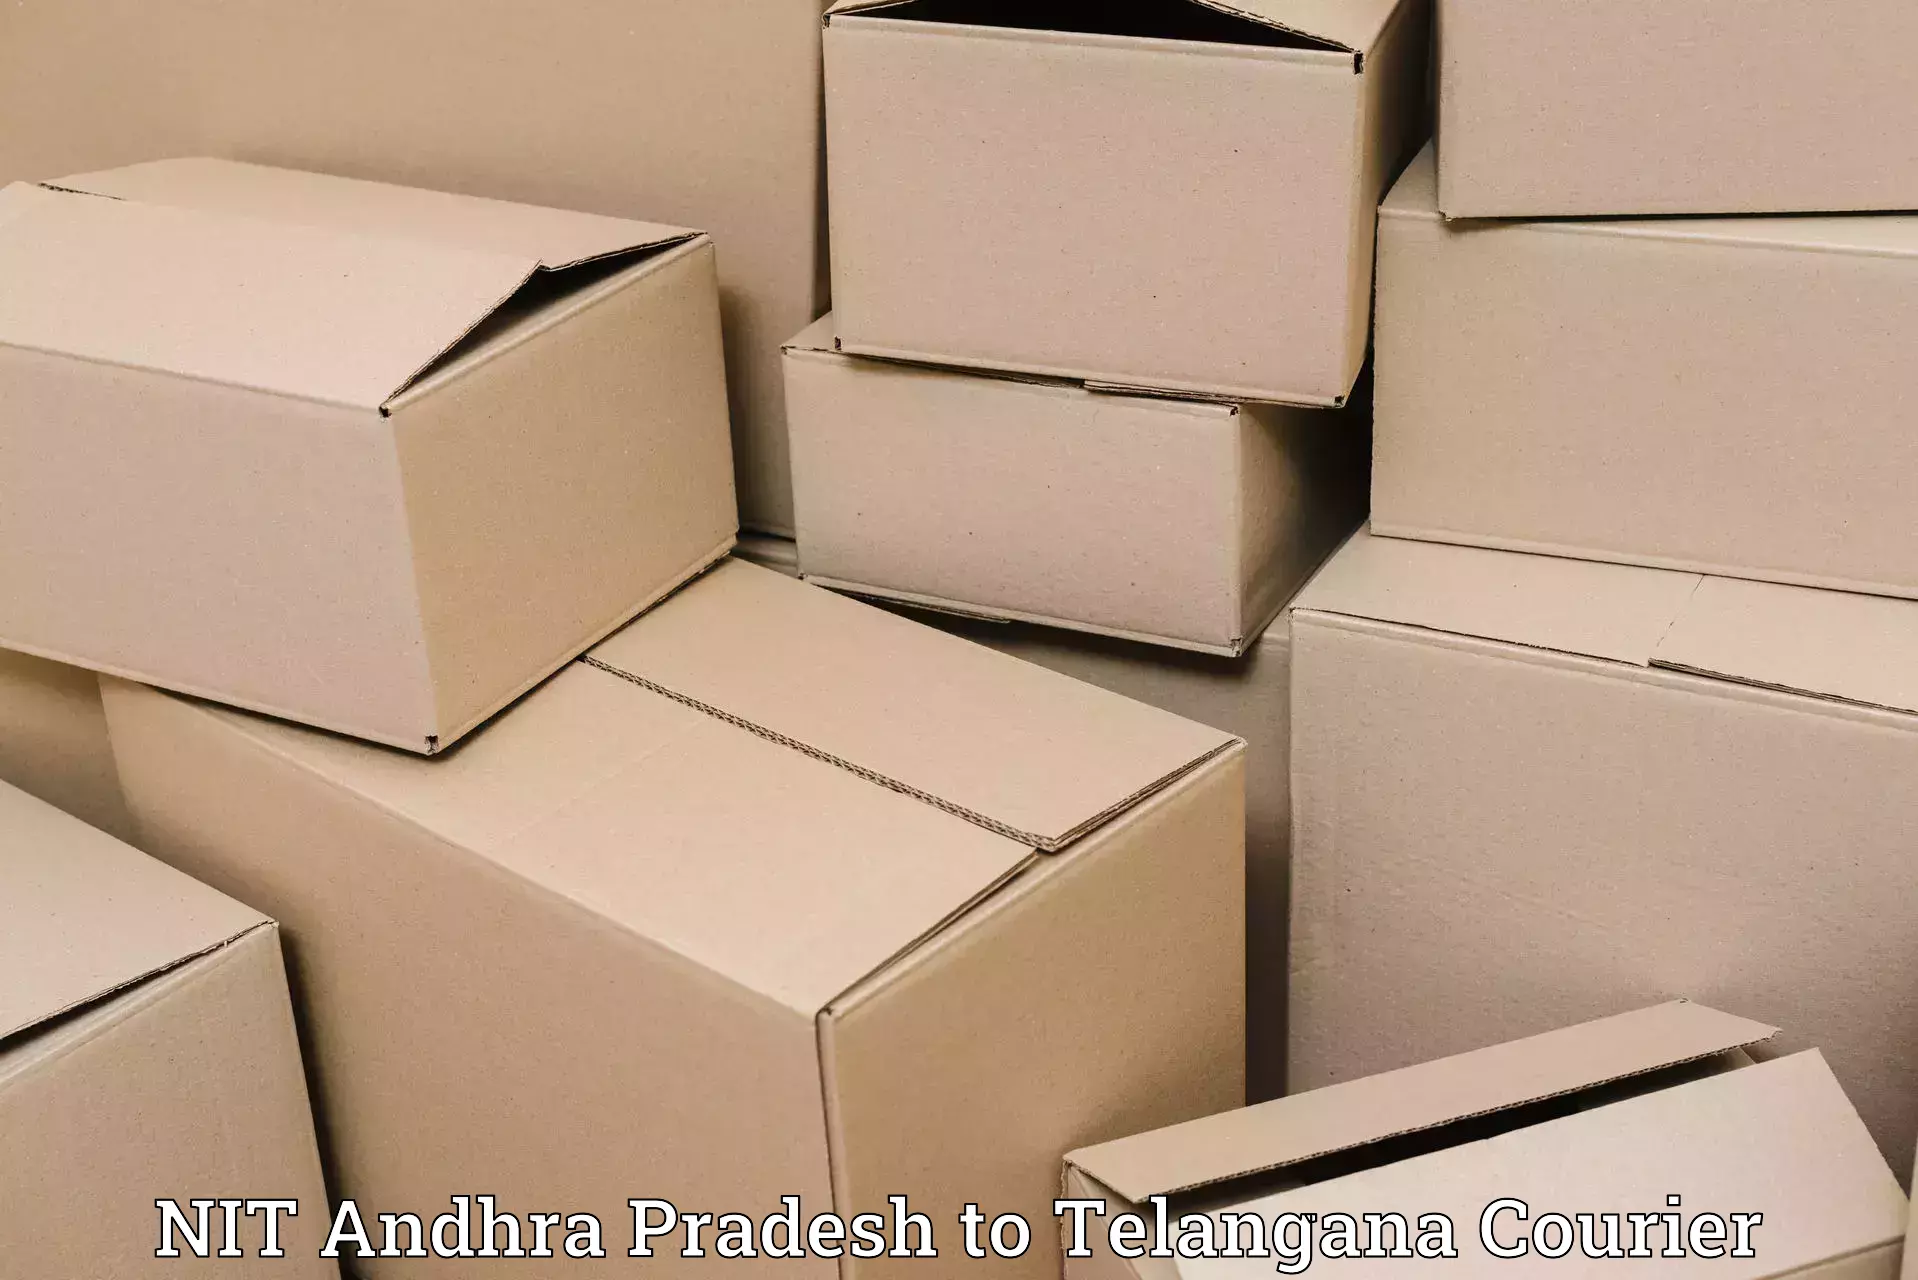 Overnight delivery services NIT Andhra Pradesh to Telangana